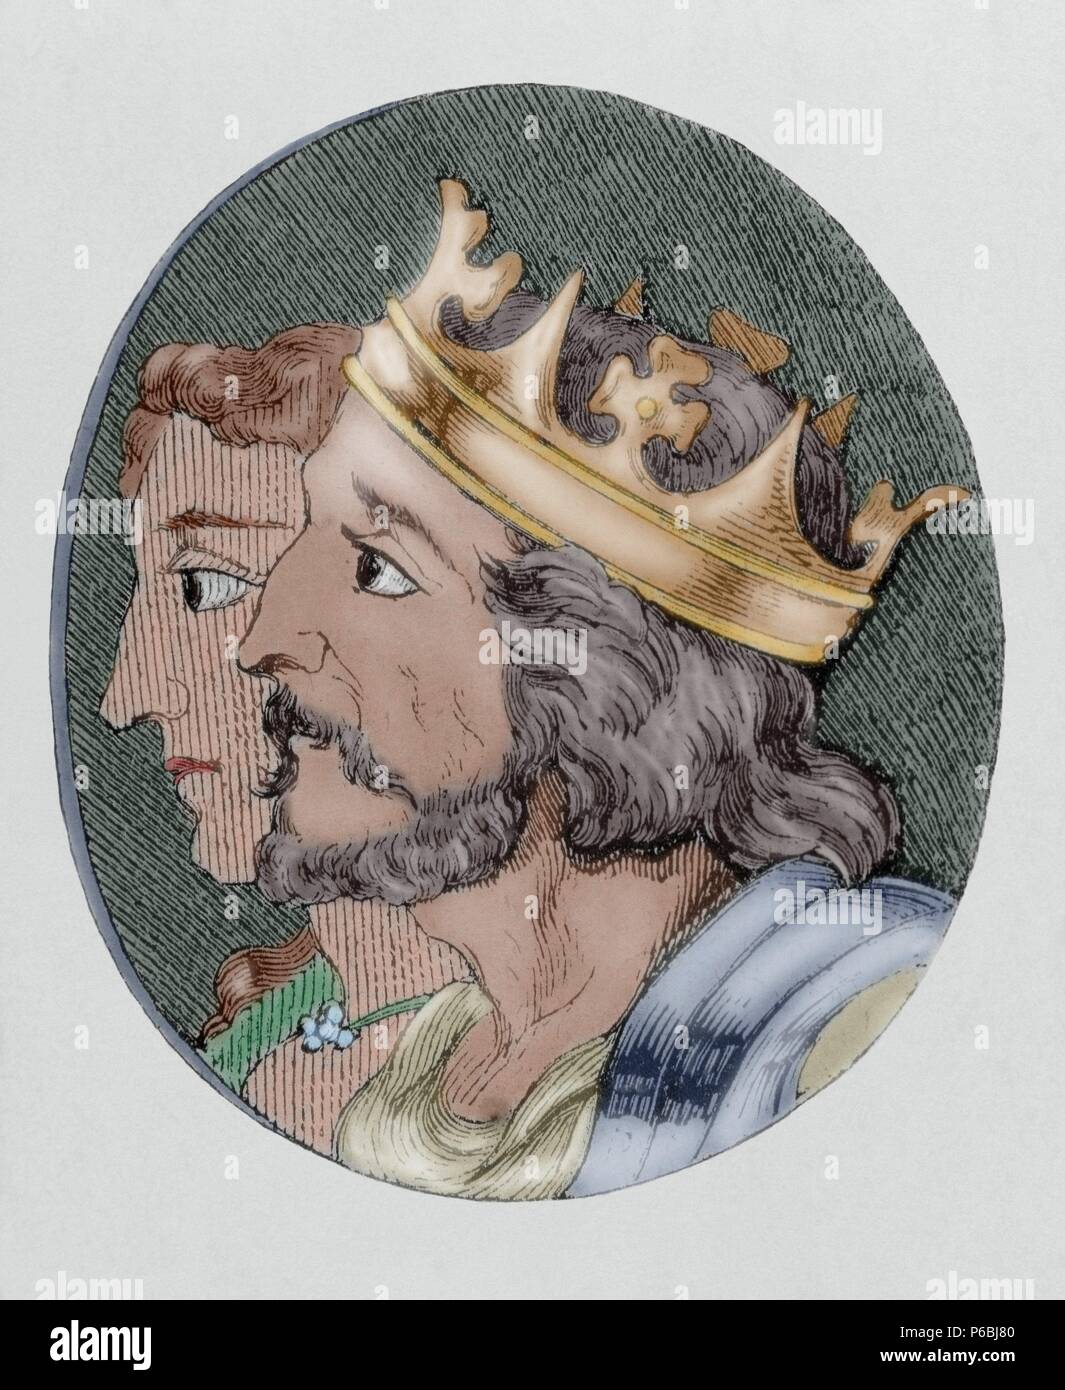 Ferdinand I of Leo n and Castile (1015-1065). The Great. The Count of Castille, and King of Leon. Engraving. Colored. Stock Photo